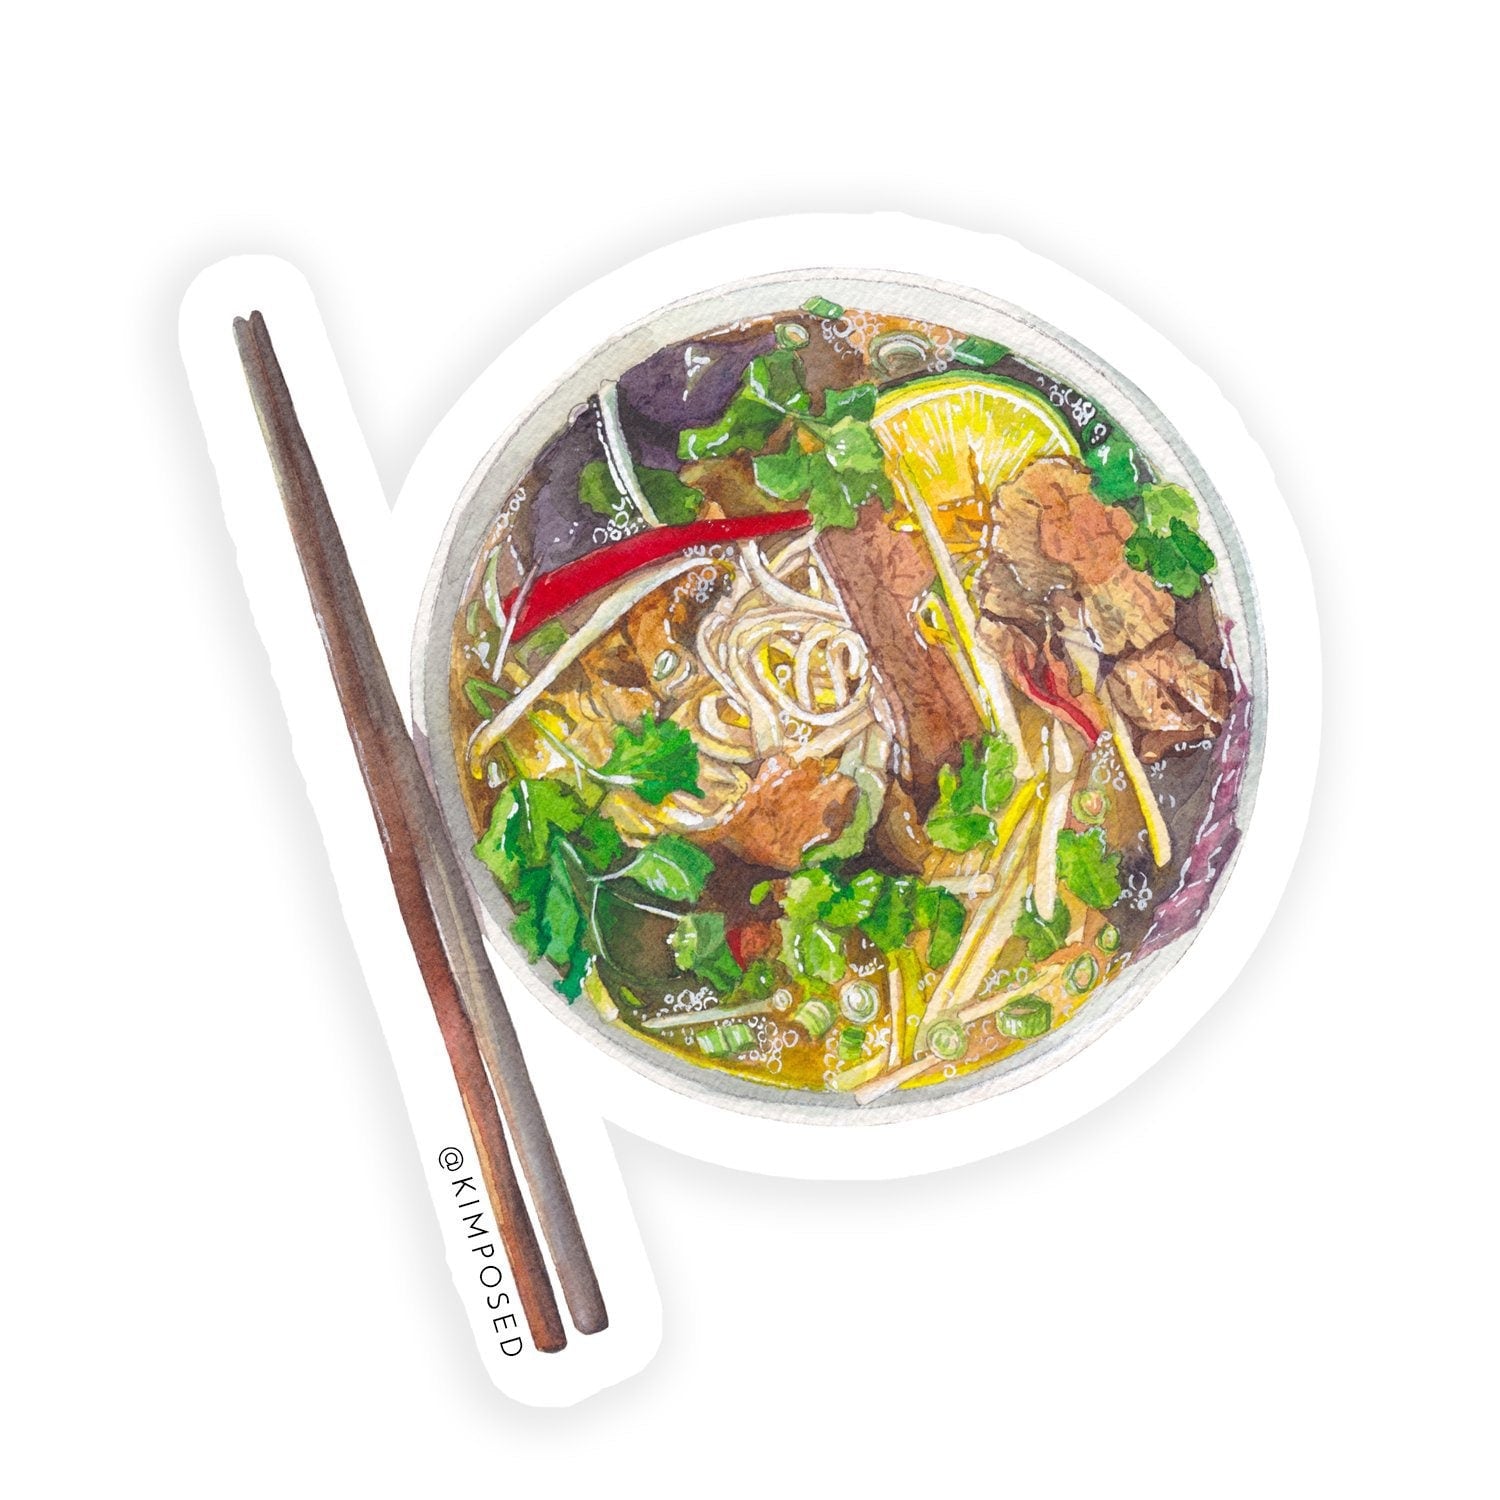 Vietnamese Pho Noodle Soup Bowl 3" Waterproof Vinyl Sticker for Water Bottles, Laptops, Phones & More **FREE USA SHIPPING**